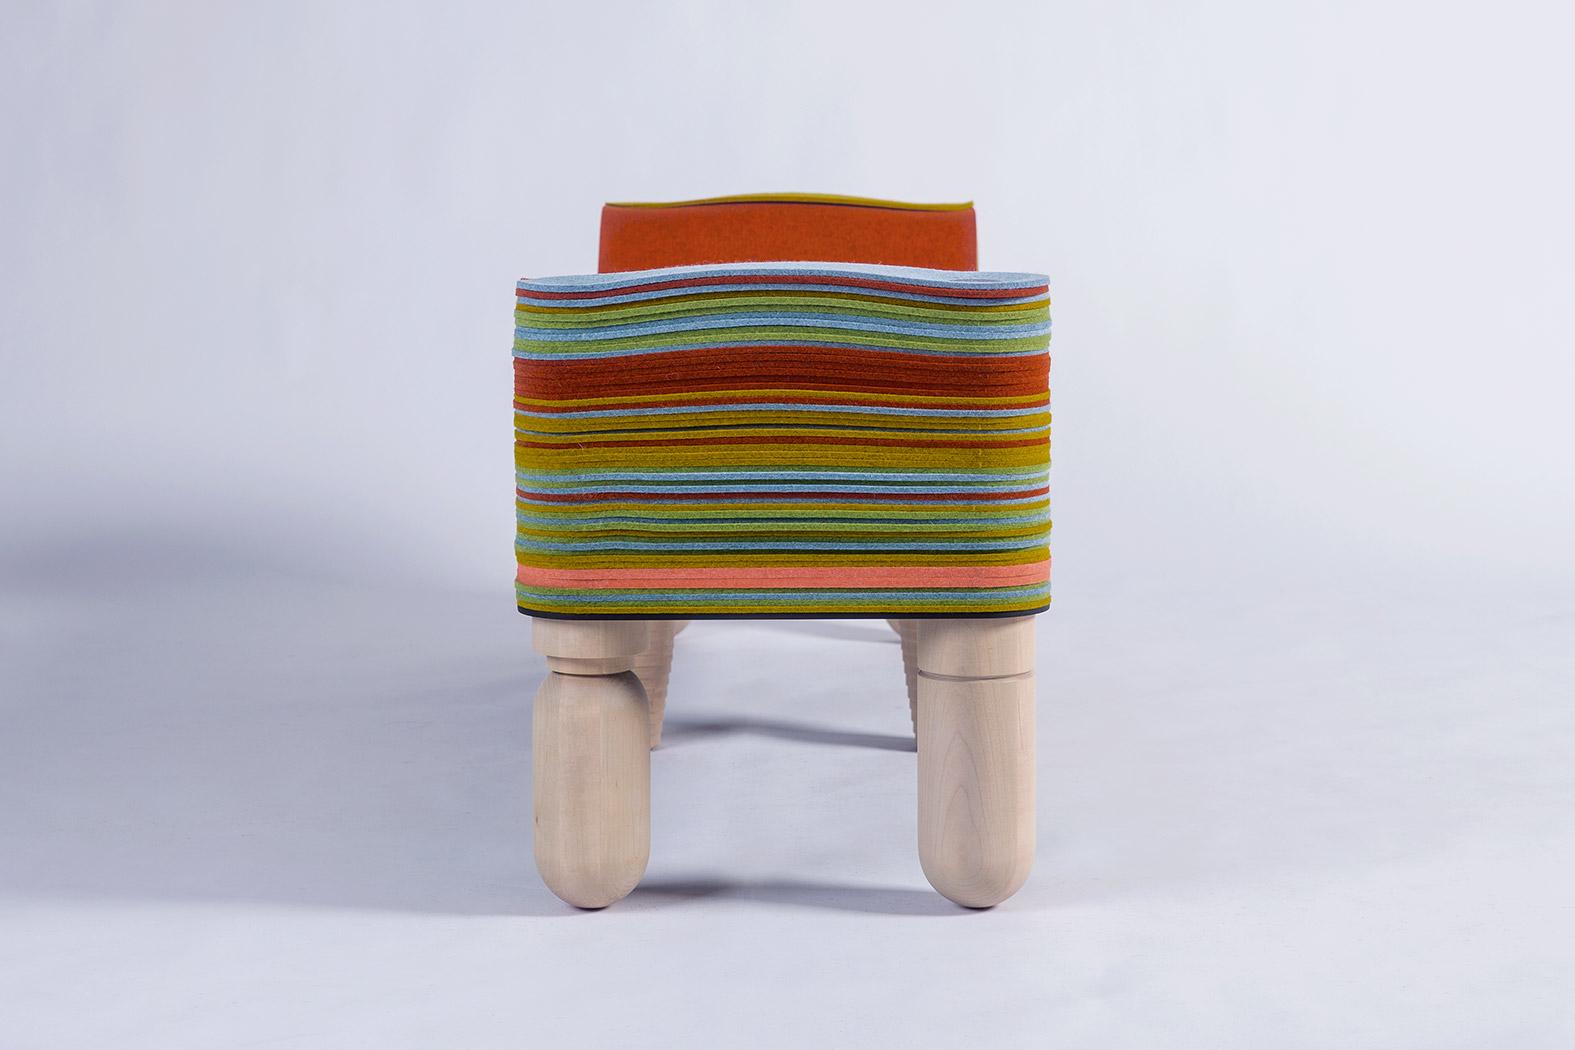 Maxine C, Felt and Wood Bench, Benoist F. Drut in Stackabl, Canada 2021 For Sale 2